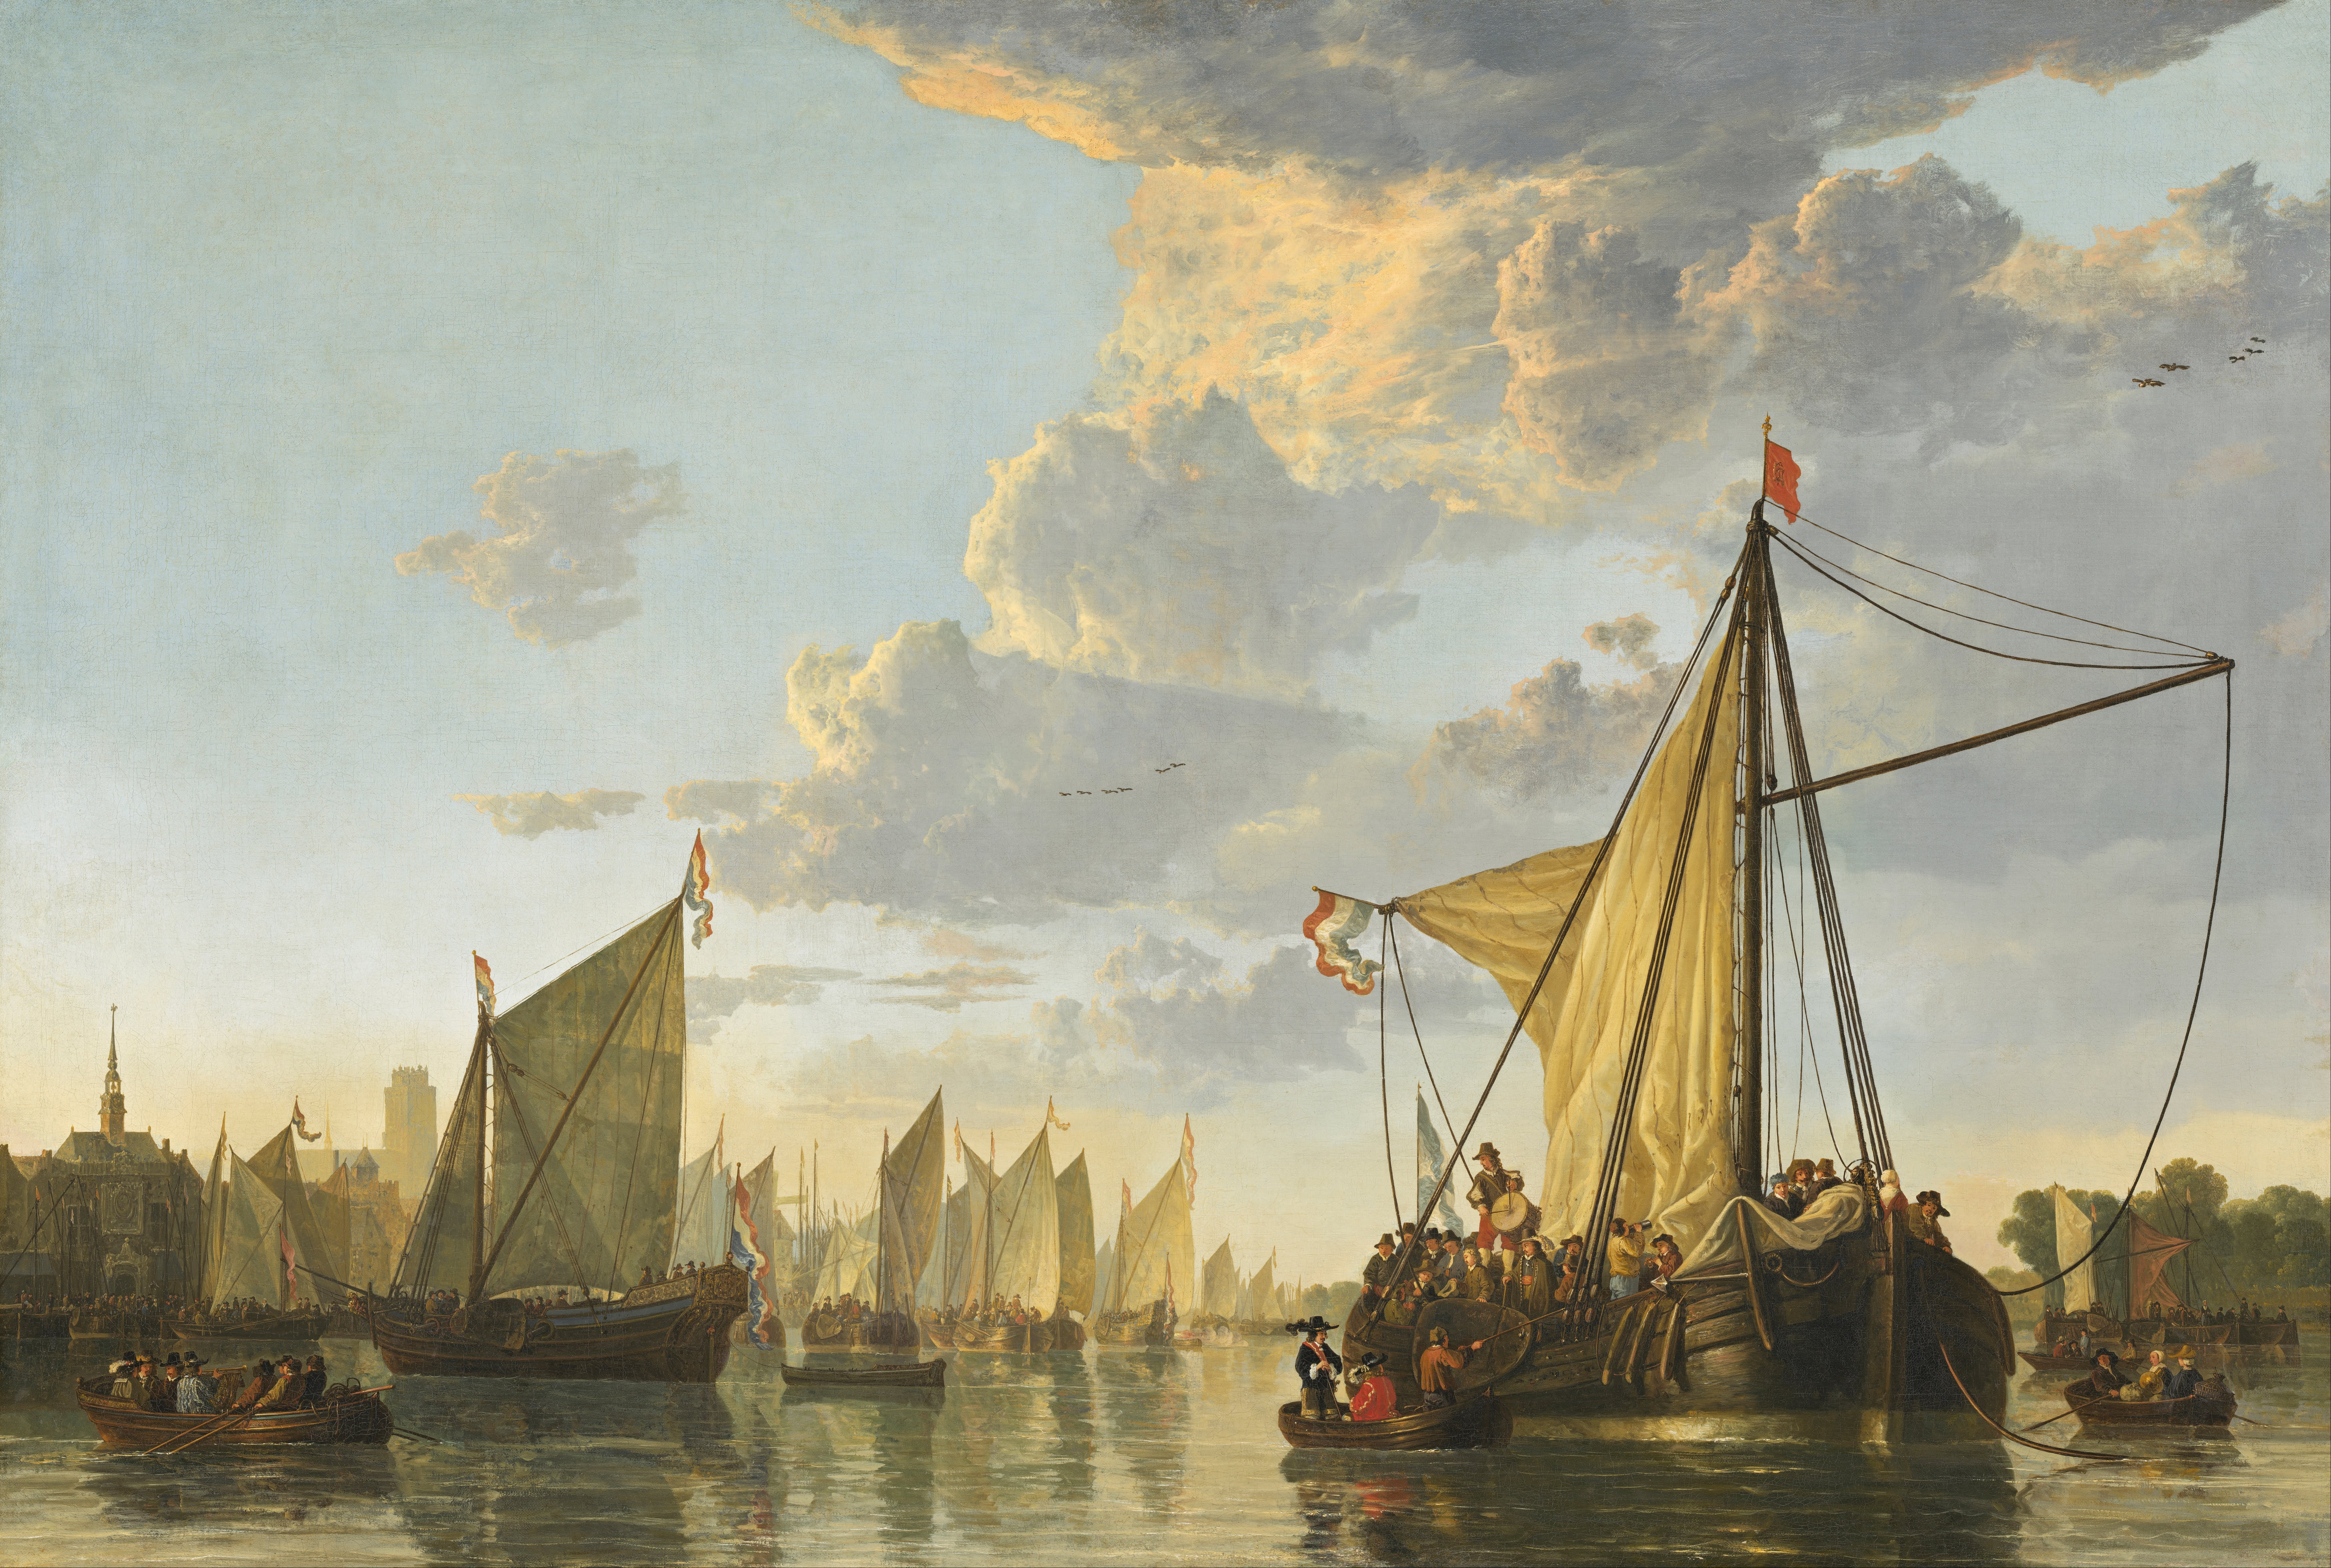 Aelbert Cuyp Artwork Painting Sailboats Boat Sunrise Oil On Canvas Oil Painting Soldier Fleet Clouds 7276x4895